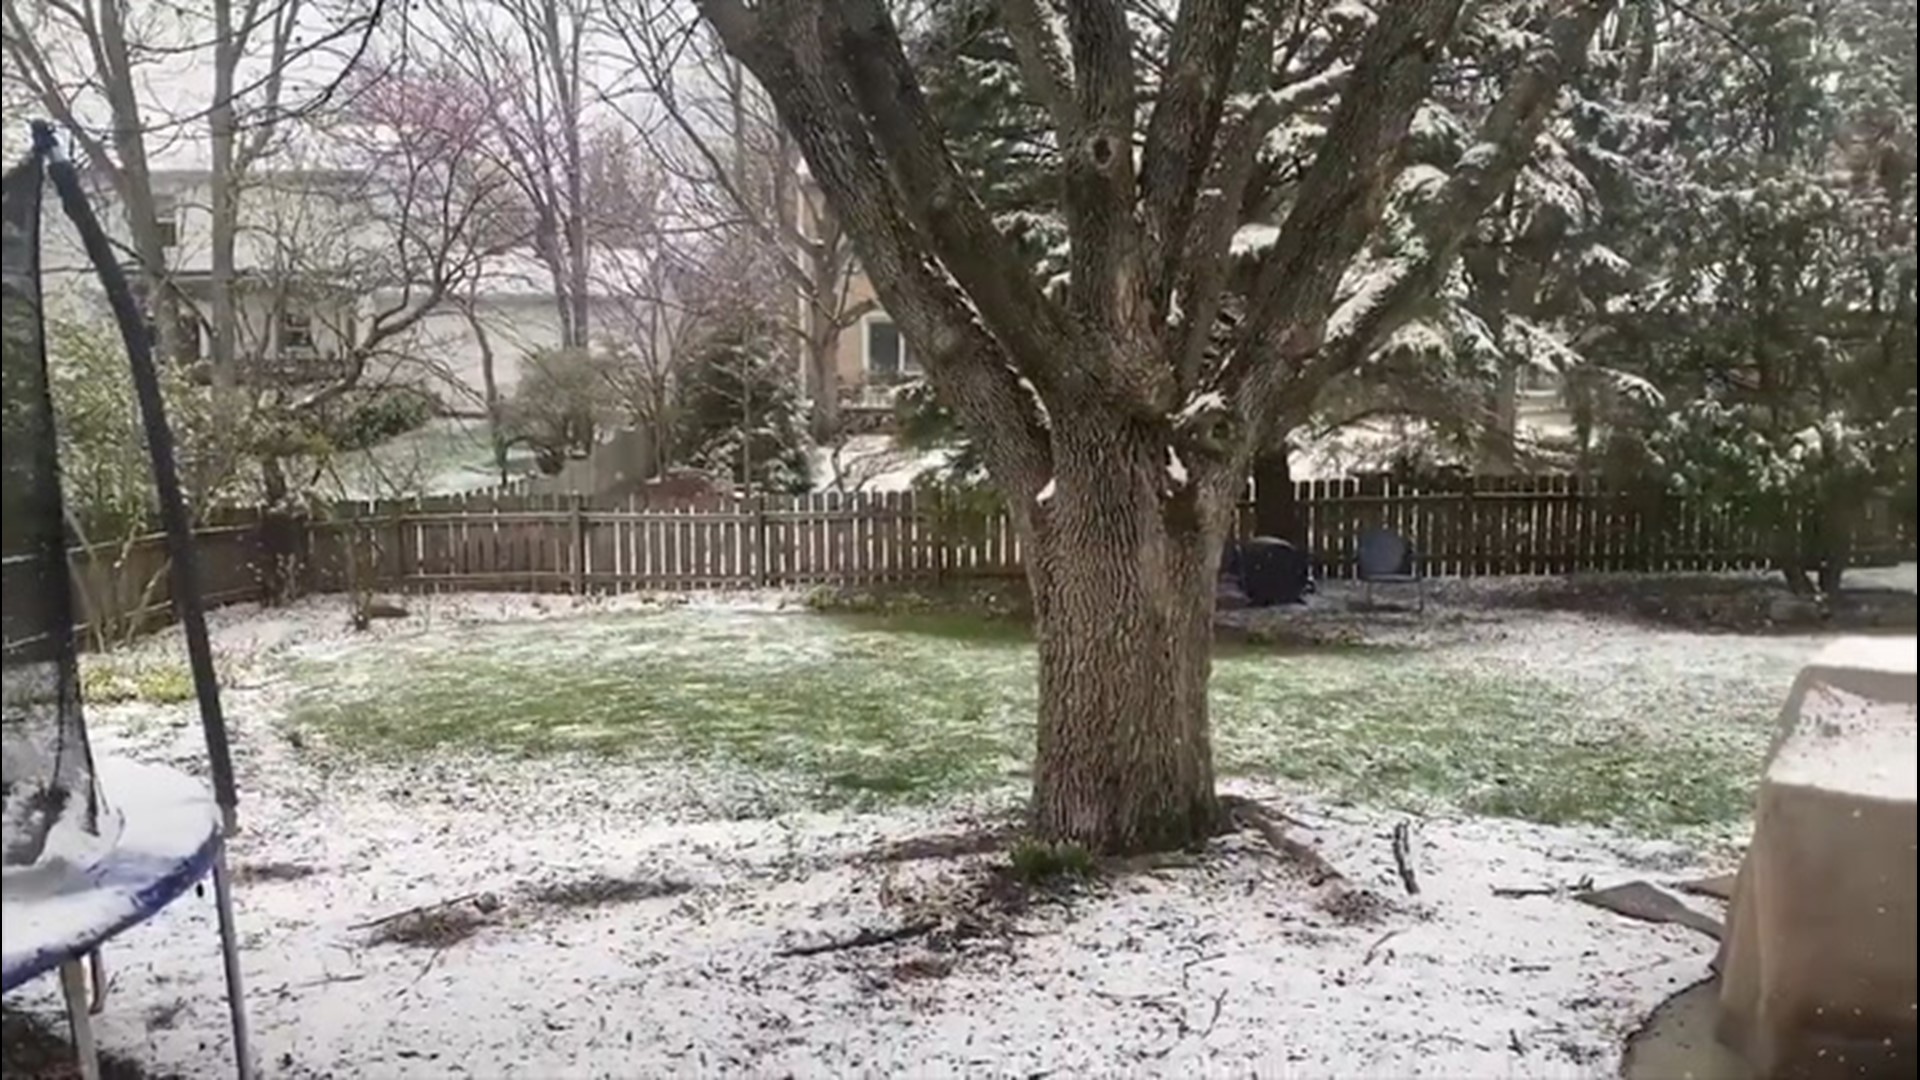 A system that brought late-season snow from the Rockies to the Plains continued along its track on April 20, with people in the Northeast the latest to receive springtime snow.